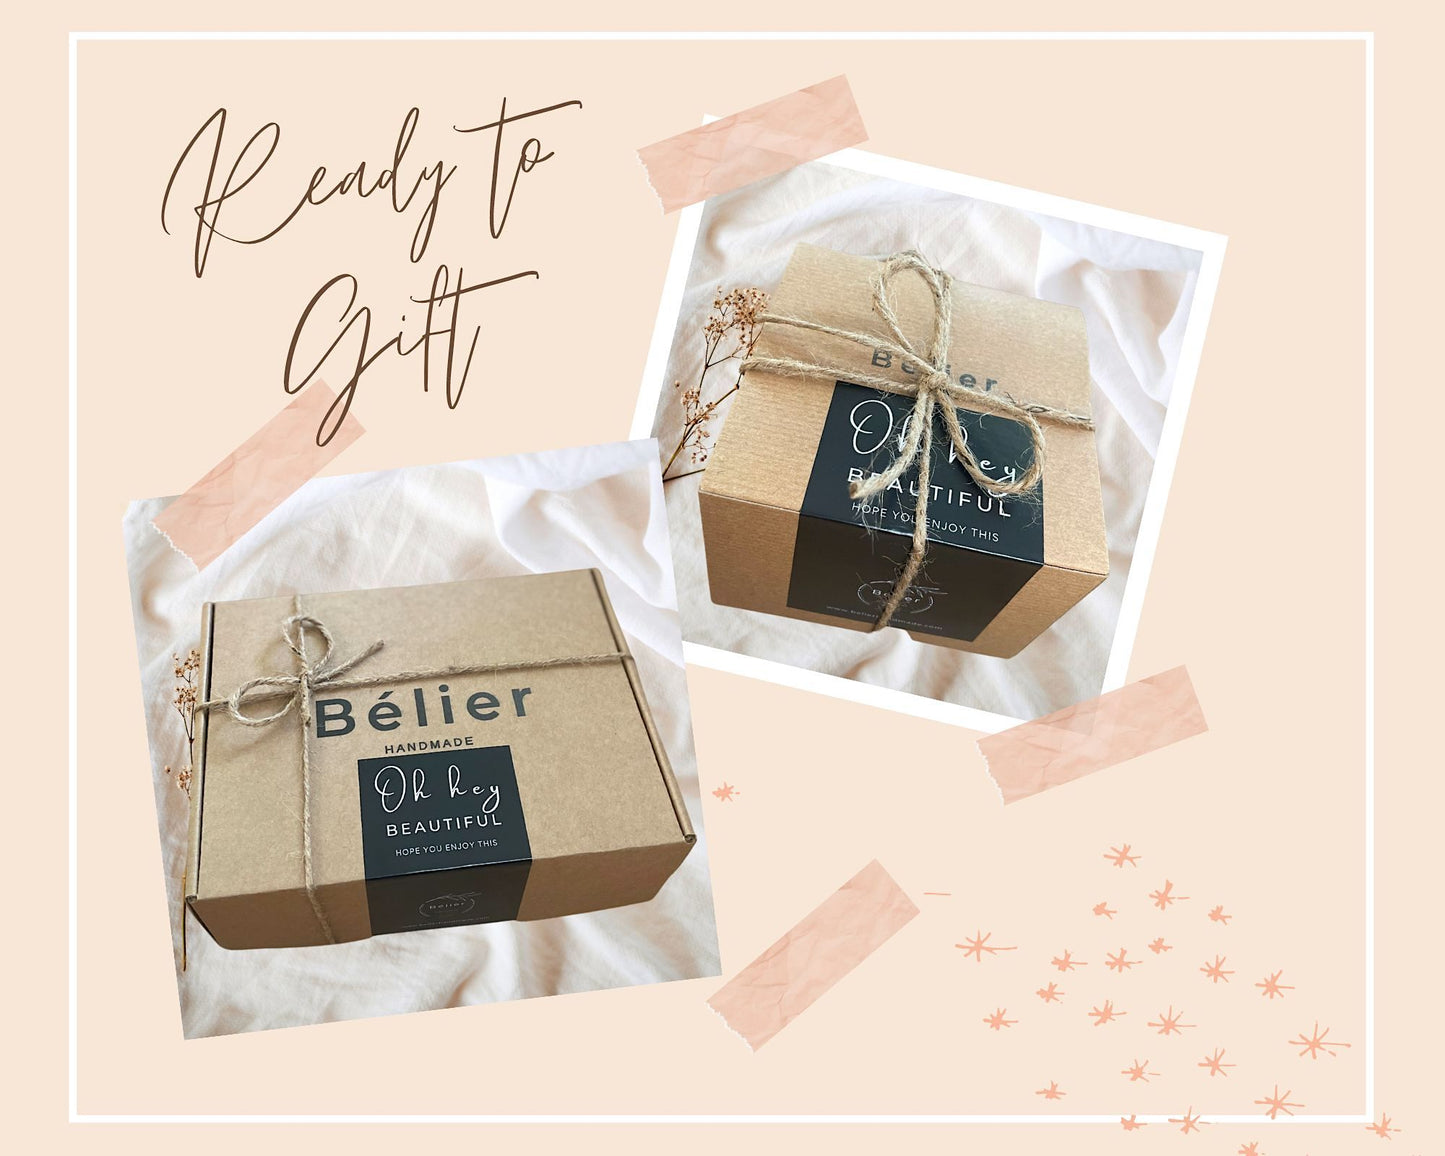 Build Your Own Gift Box Add-On